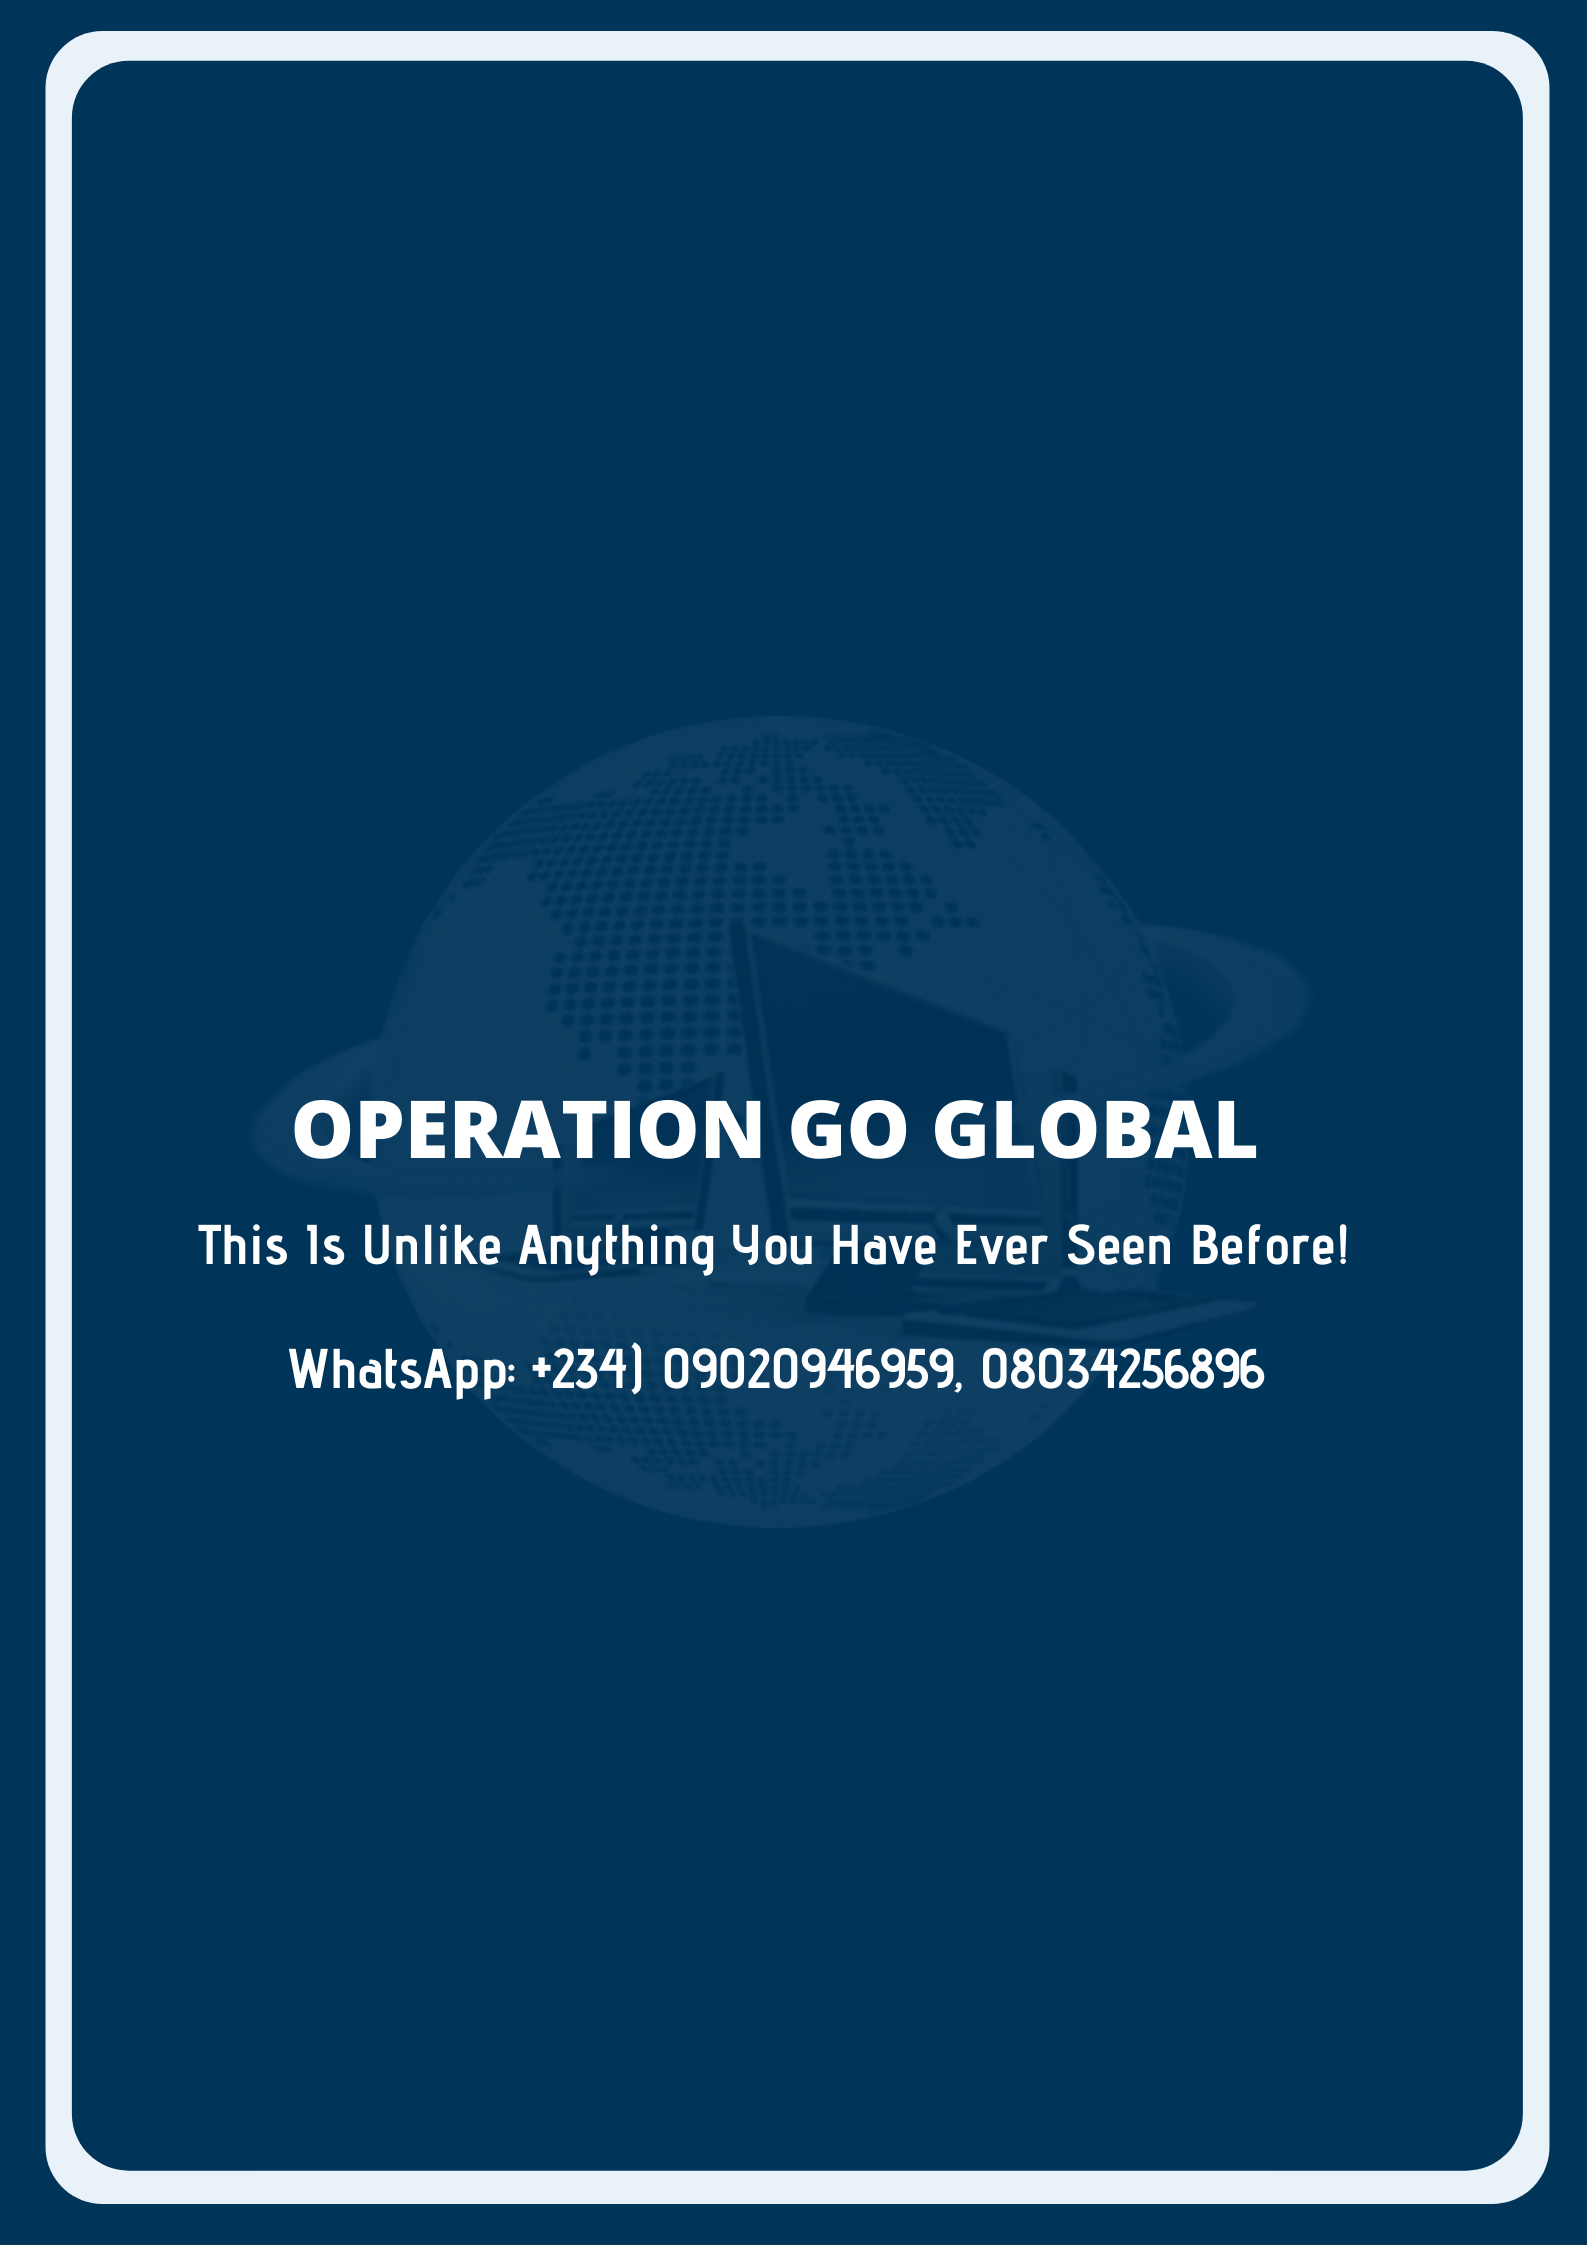 OPERATION GO GLOBAL
This 1s Unlike Anything You Have Ever Seen Before!

WhatsApp: +234) 09020946959, 0803425689